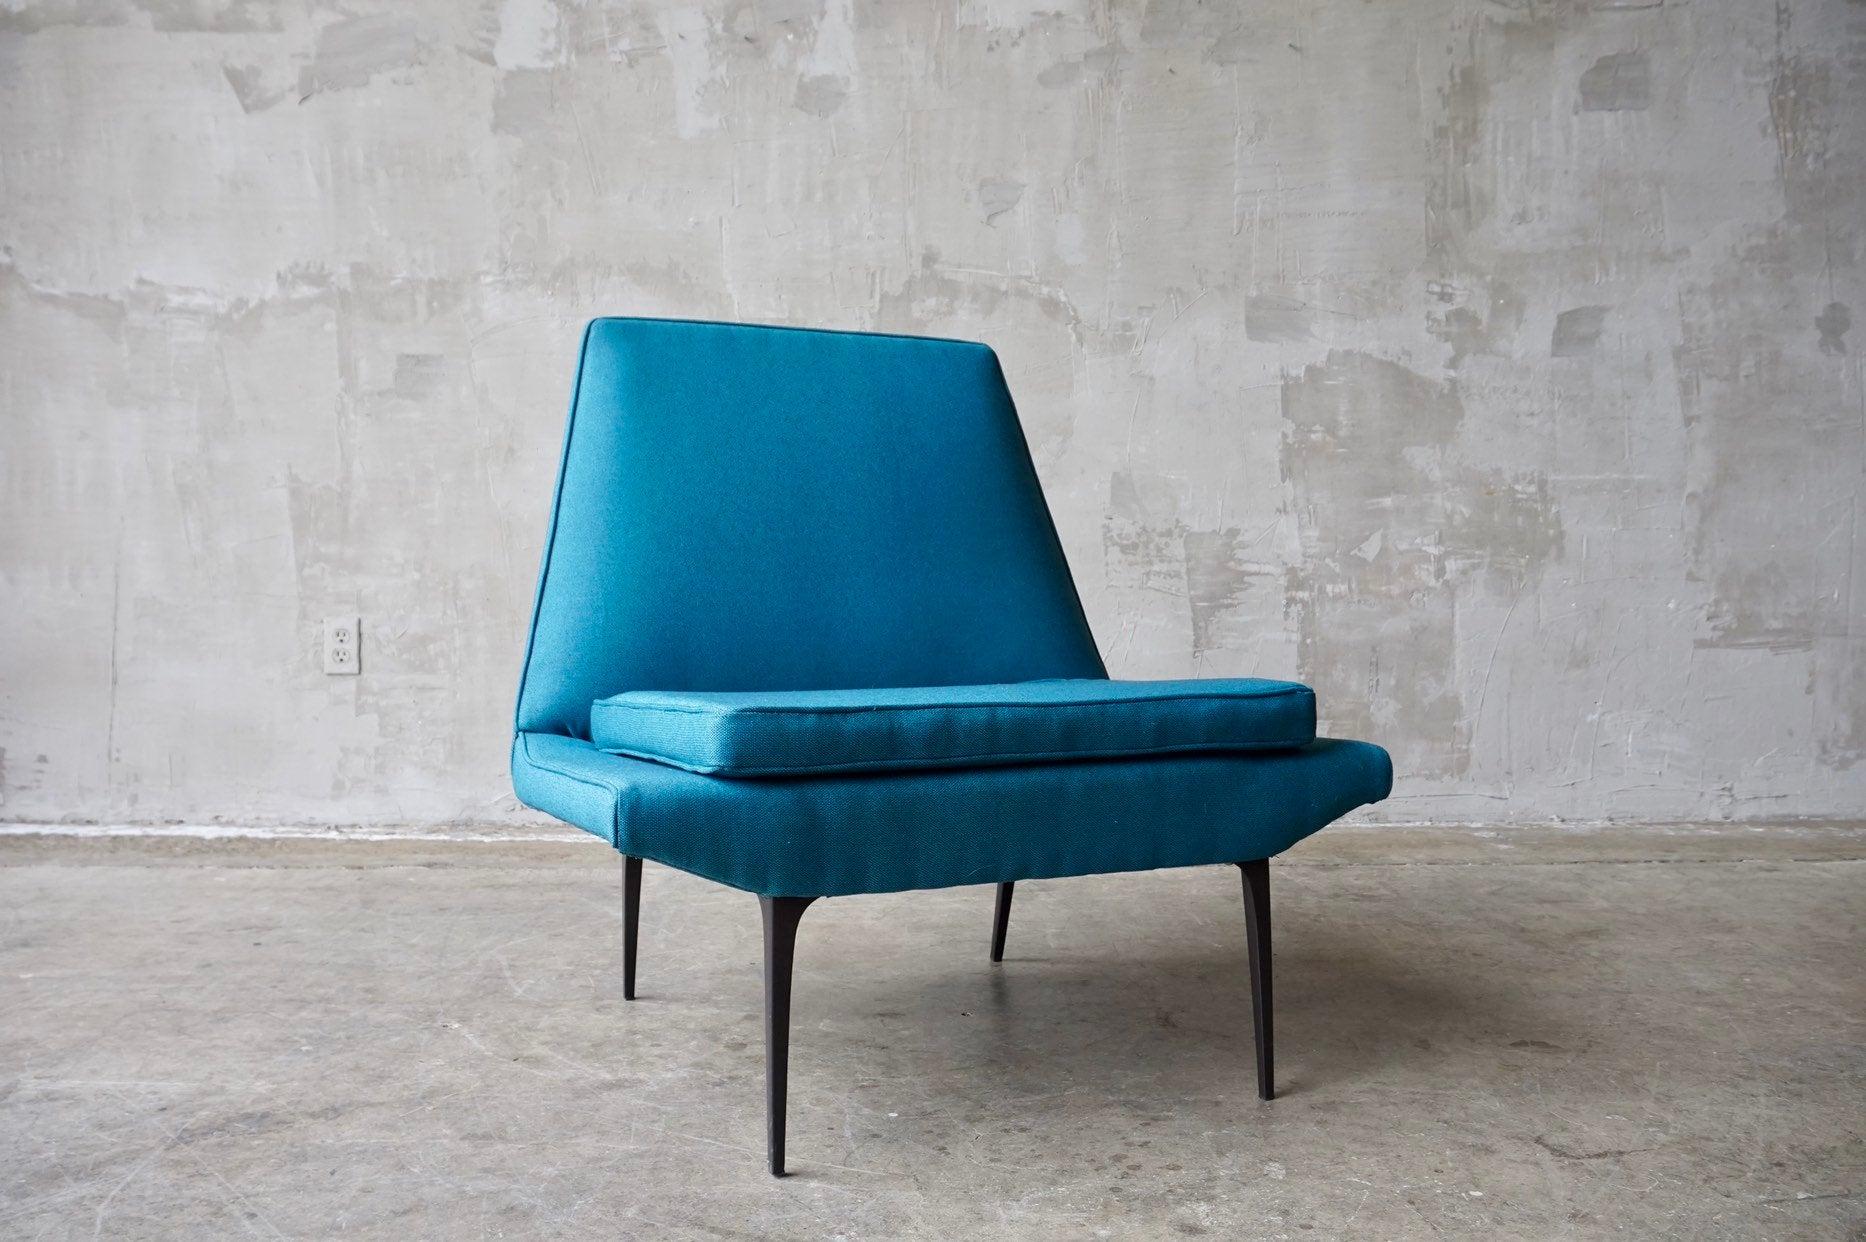 Heywood Wakefield 'Metronome' Chair in Blue In Good Condition For Sale In Merced, CA